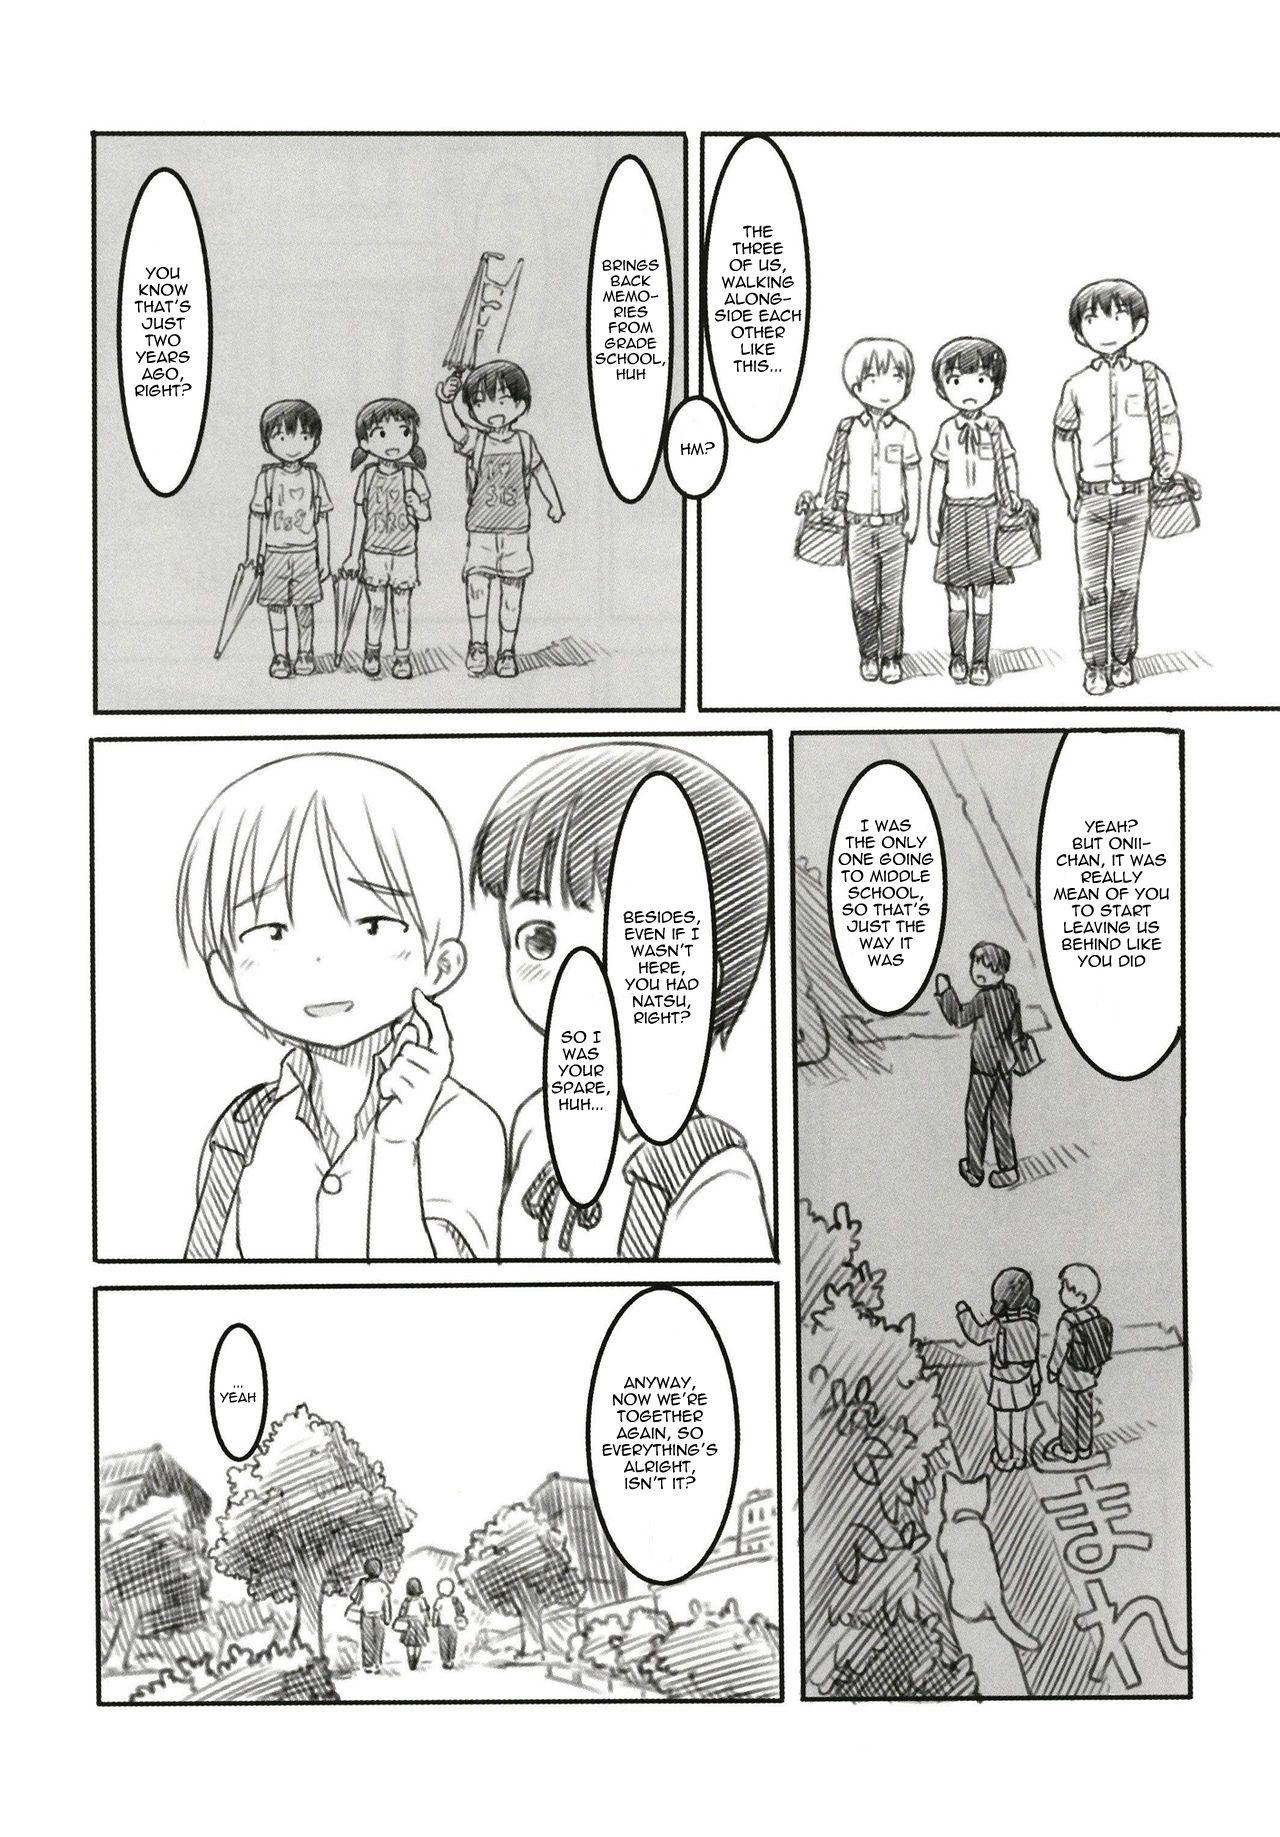 Old And Young Shinyuu wa Imouto no Kareshi | My friend is my little sister's boyfriend - Original One - Page 5